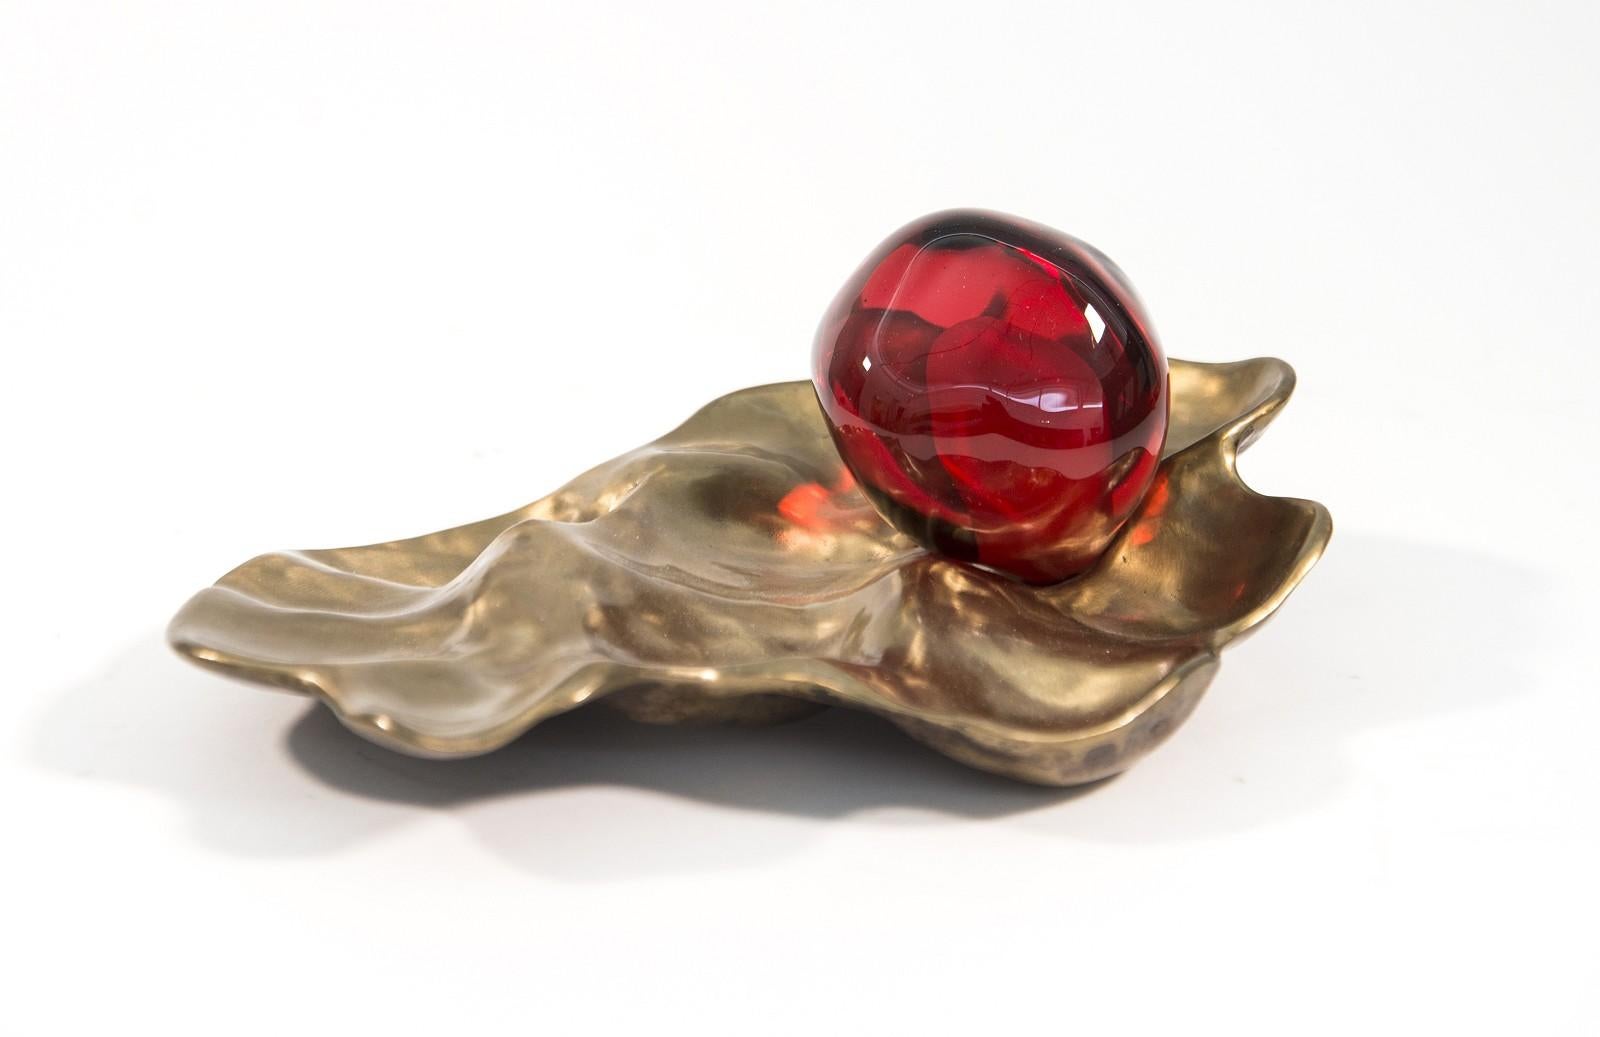 Pomegranate with Casing - small, bright red, glass, bronze, still life sculpture - Sculpture by Catherine Vamvakas Lay